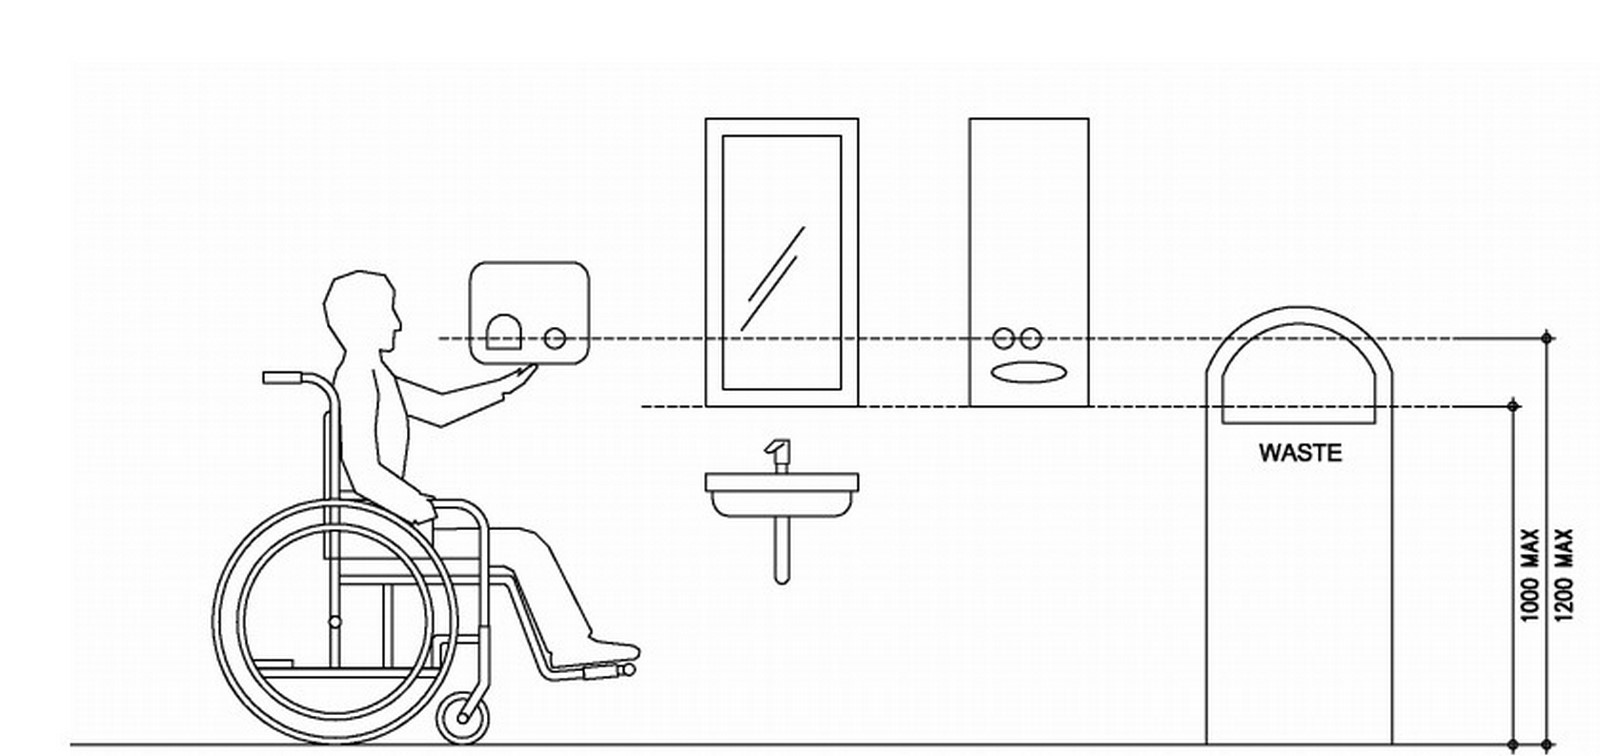 10 things to remember when designing accessible forms - Sheet5